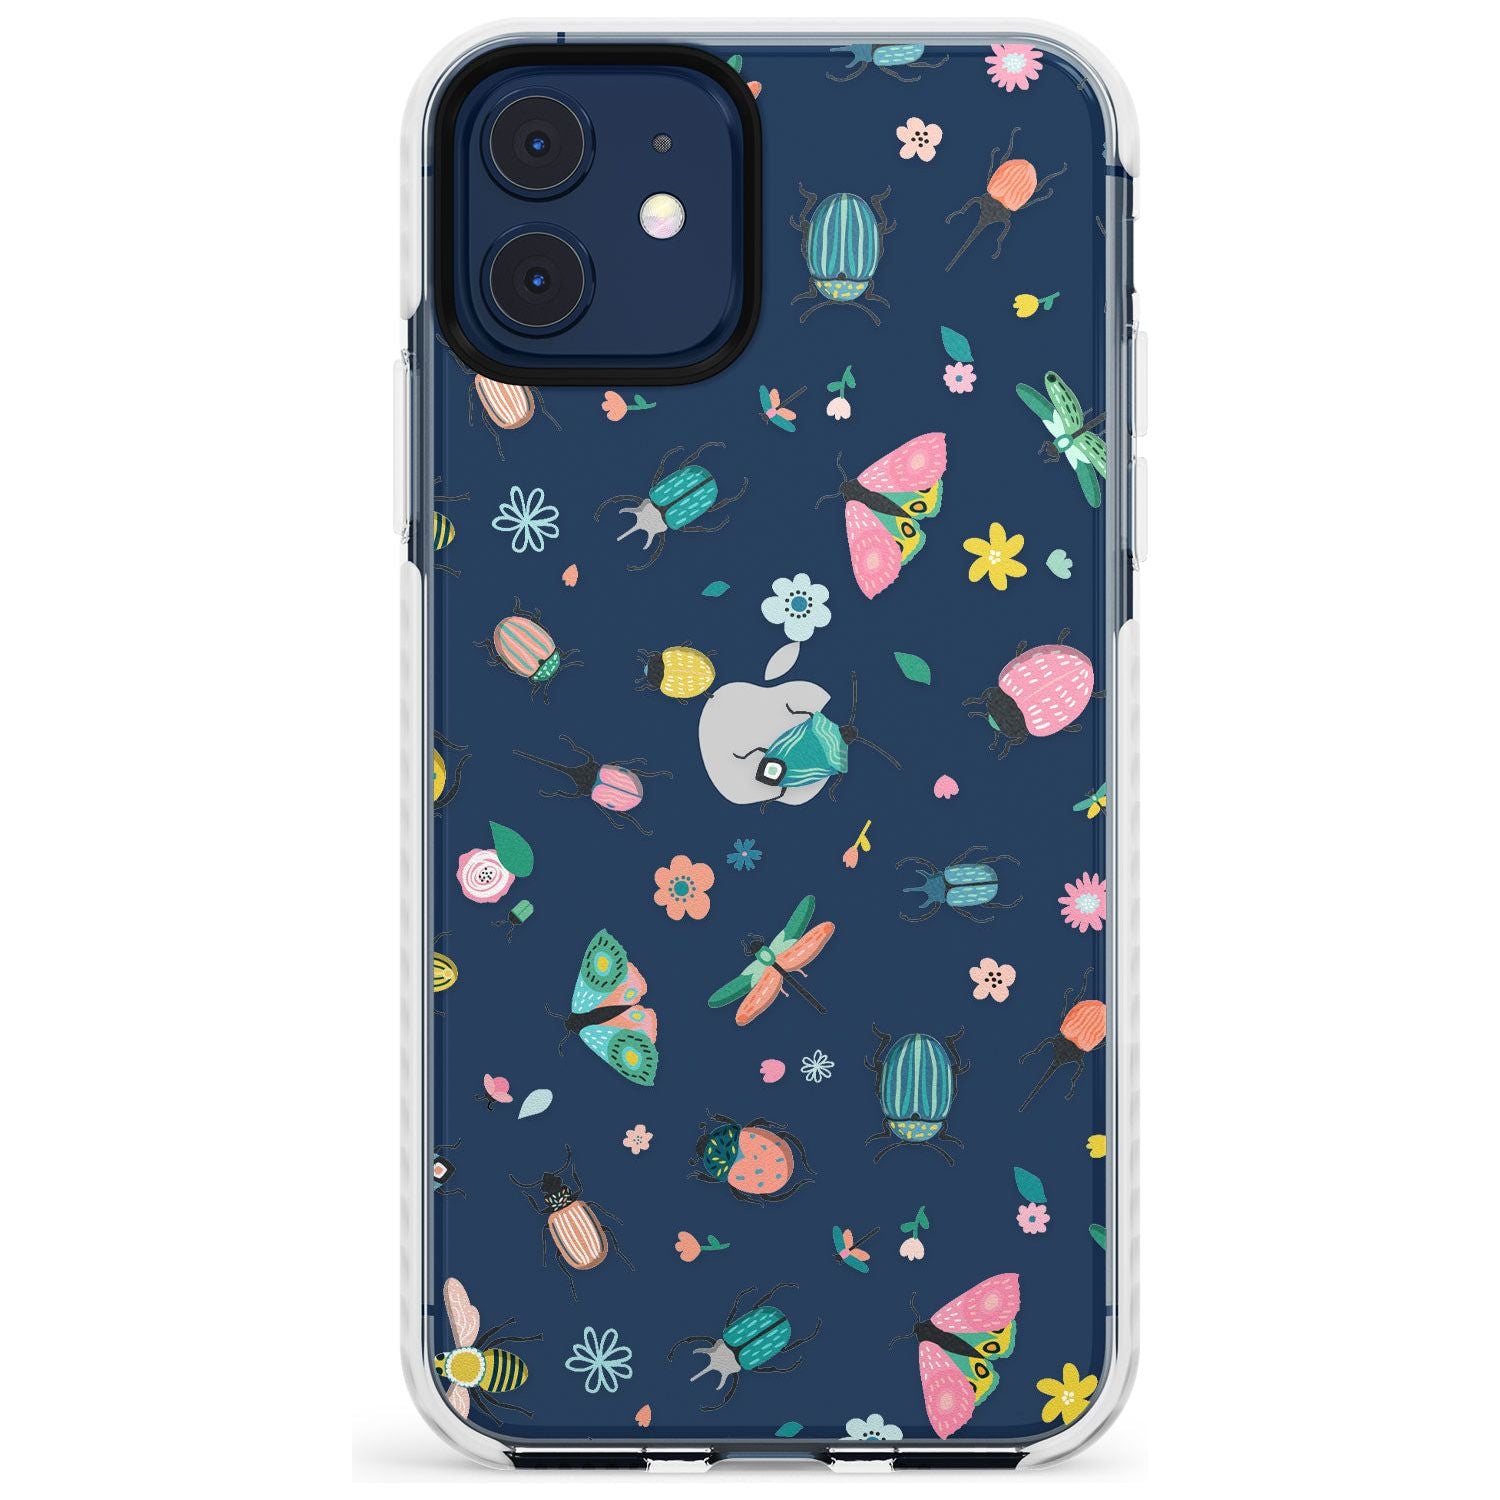 Spring Insects Slim TPU Phone Case for iPhone 11